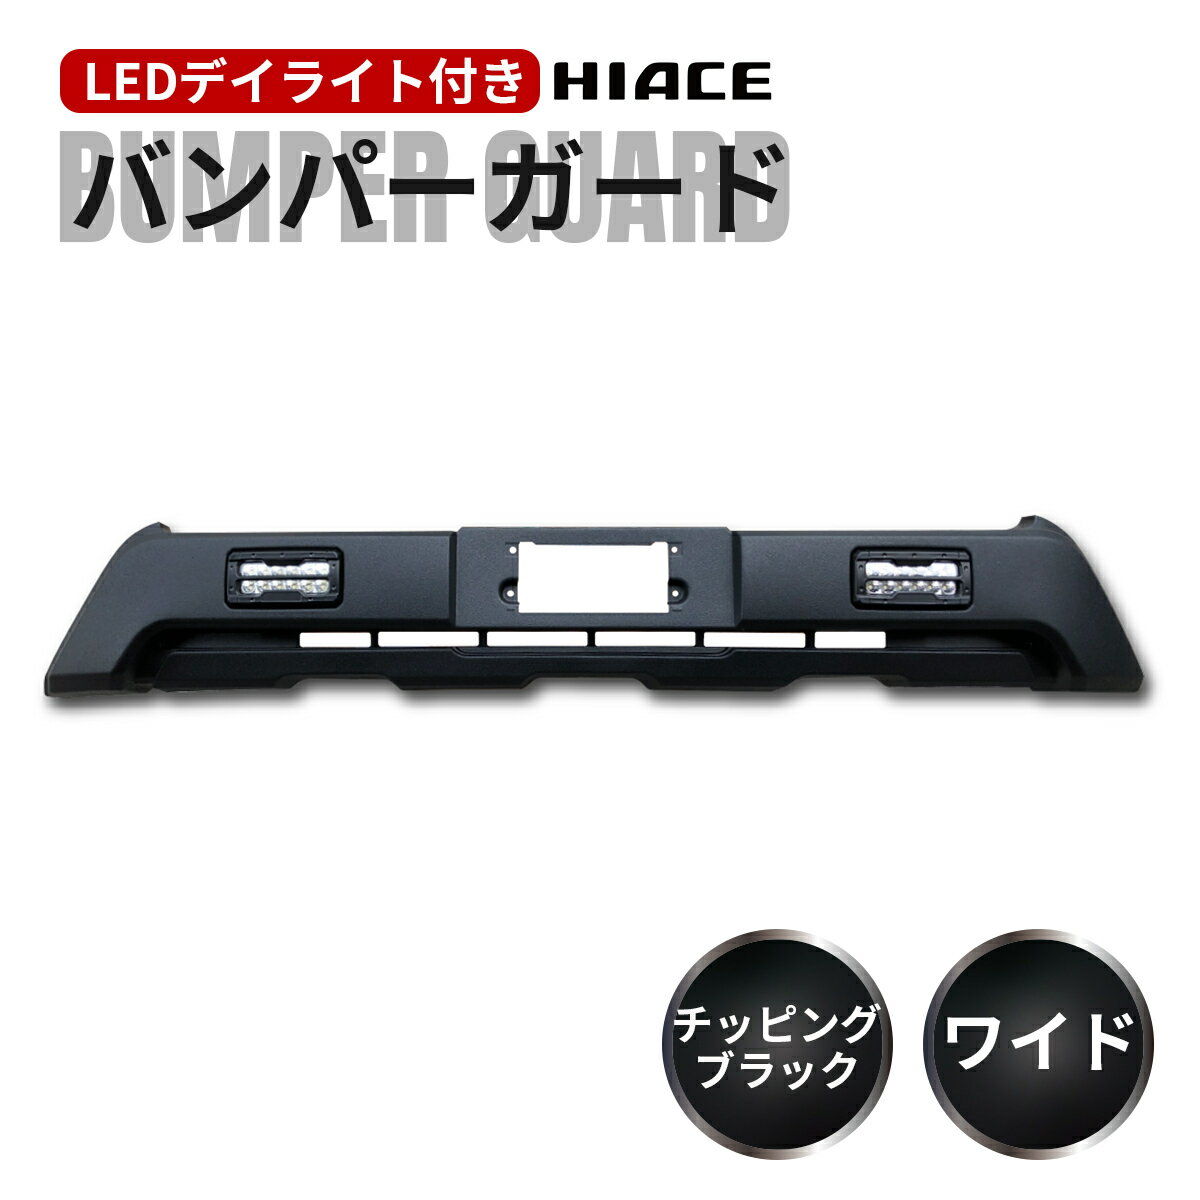 Cover Rear Trunk 35INCH車のトラックリアバンパーガードプロテクタートリムカバーシルプレートパッド部品AG 35INCH Car Truck Rear Bumper Guard Protector Trim Cover Sill Plate Pad Parts ag